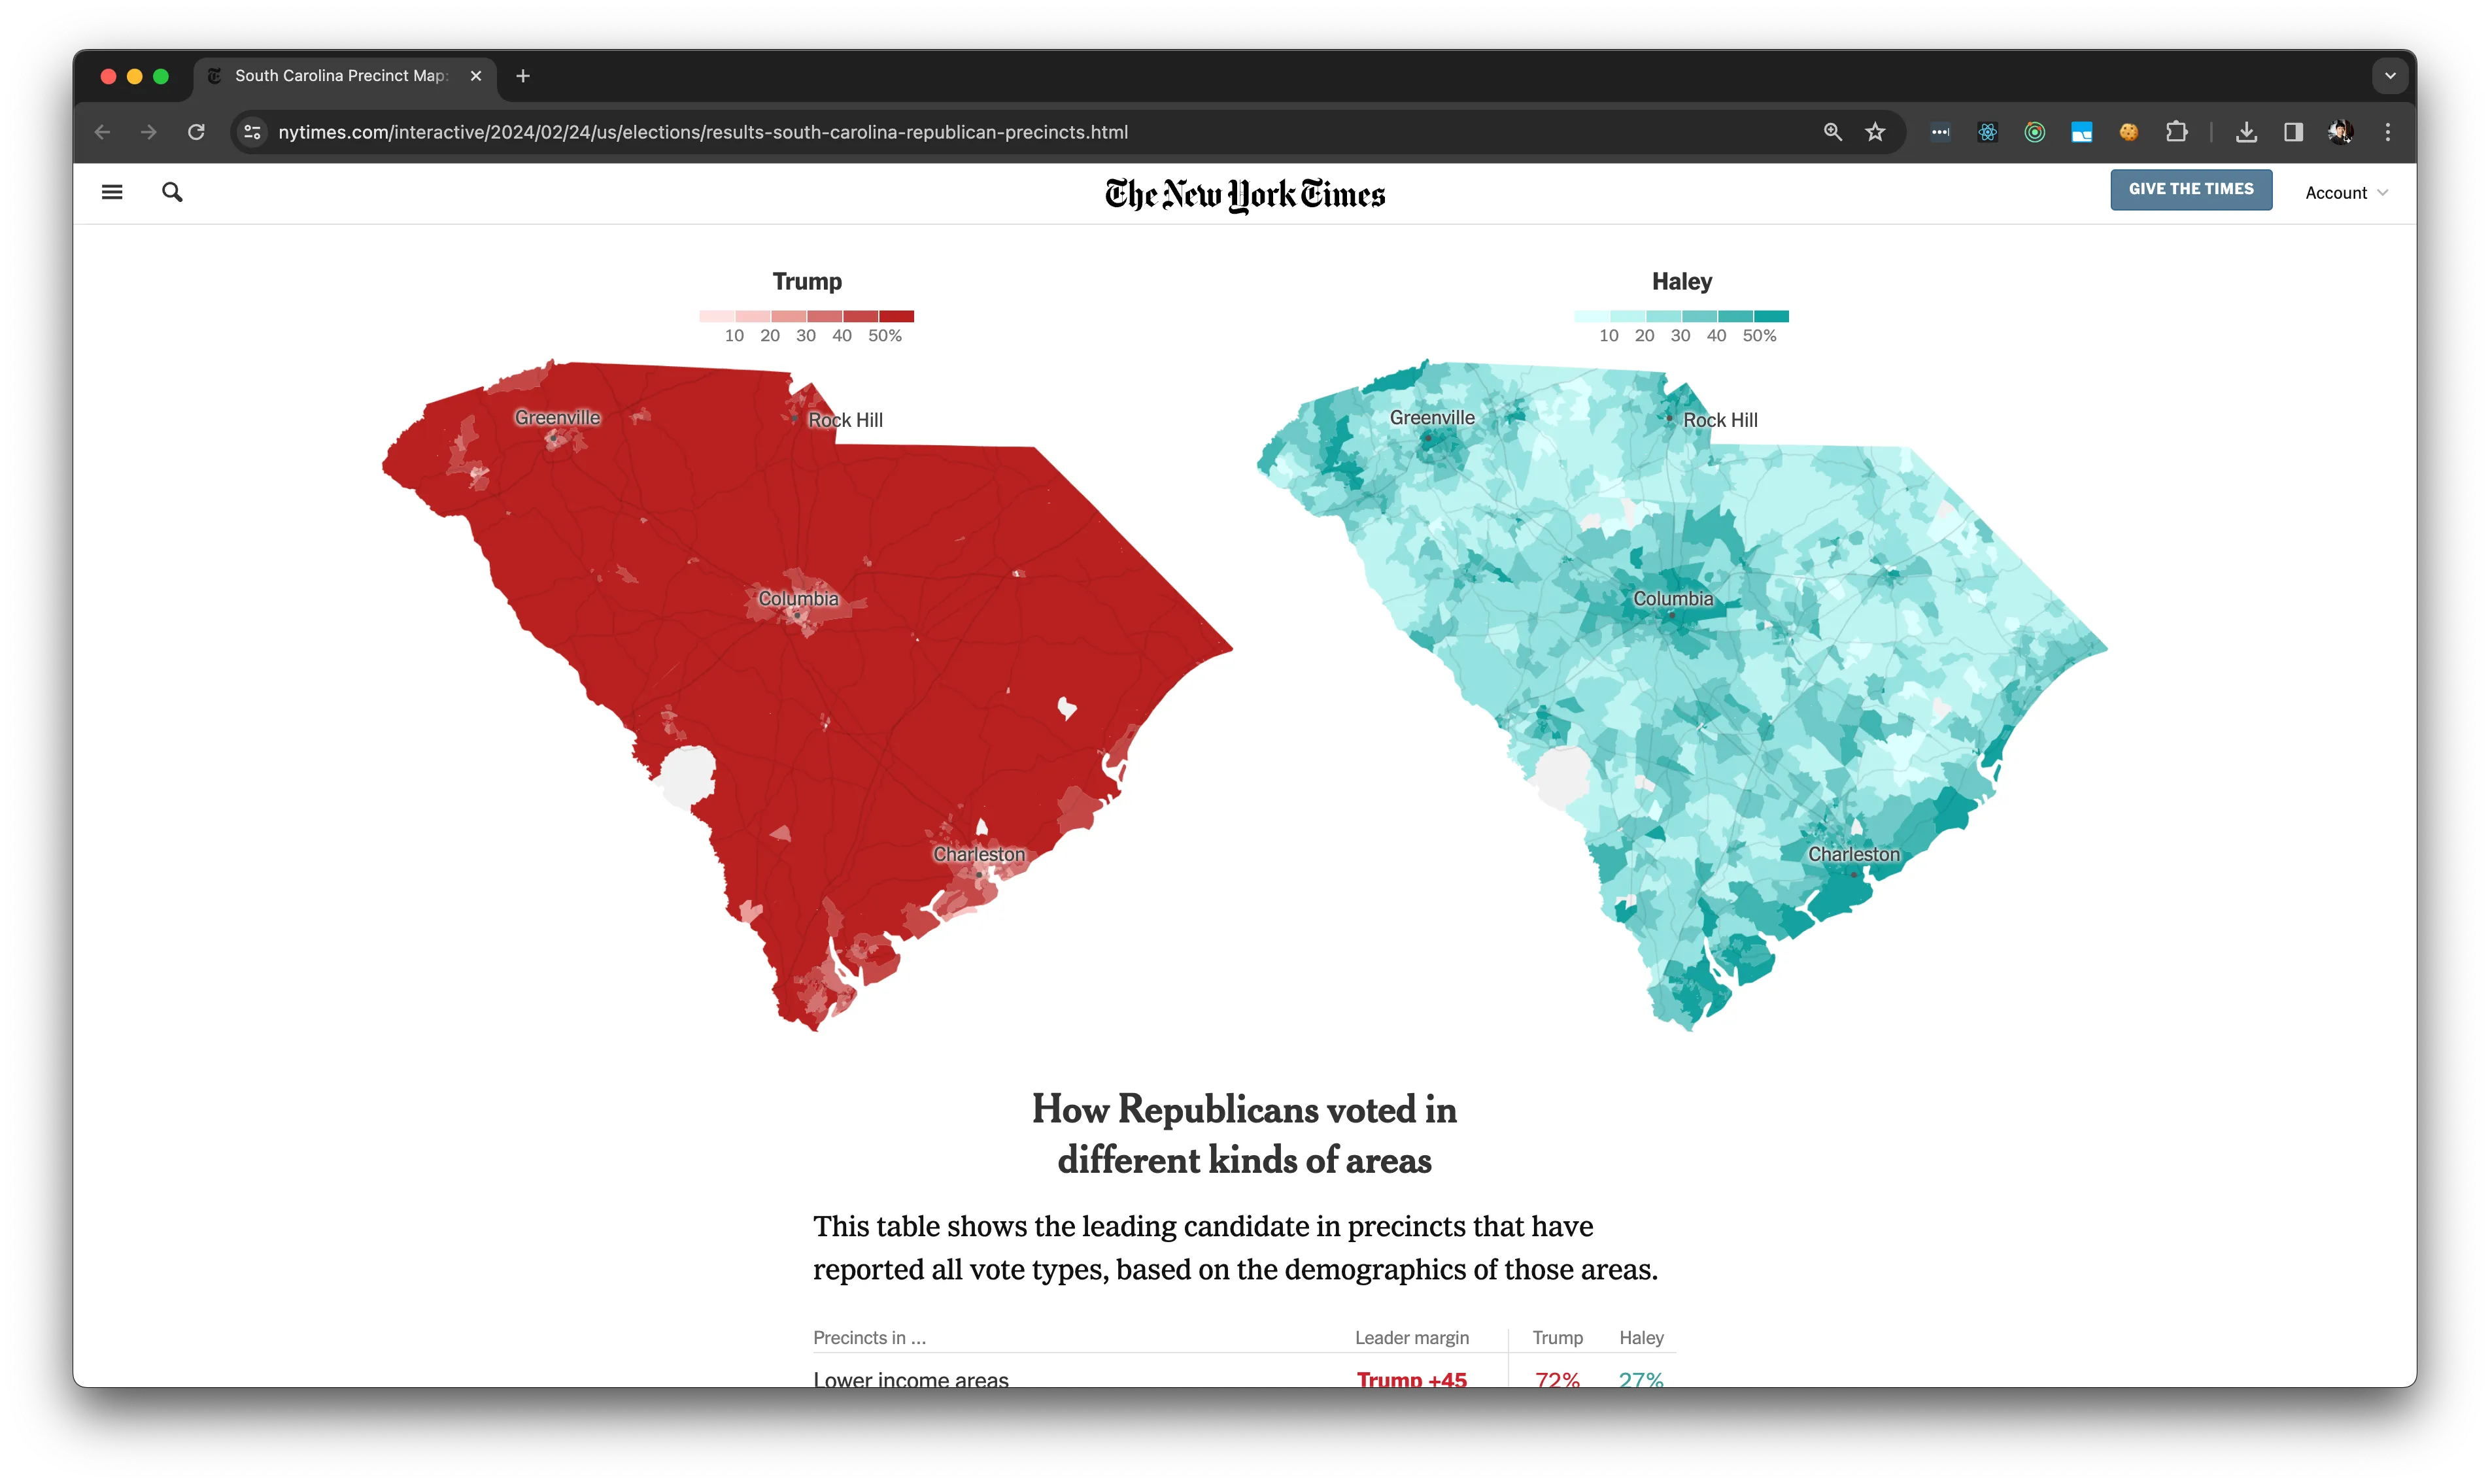 Maps comparing Trump and Haley vote shares